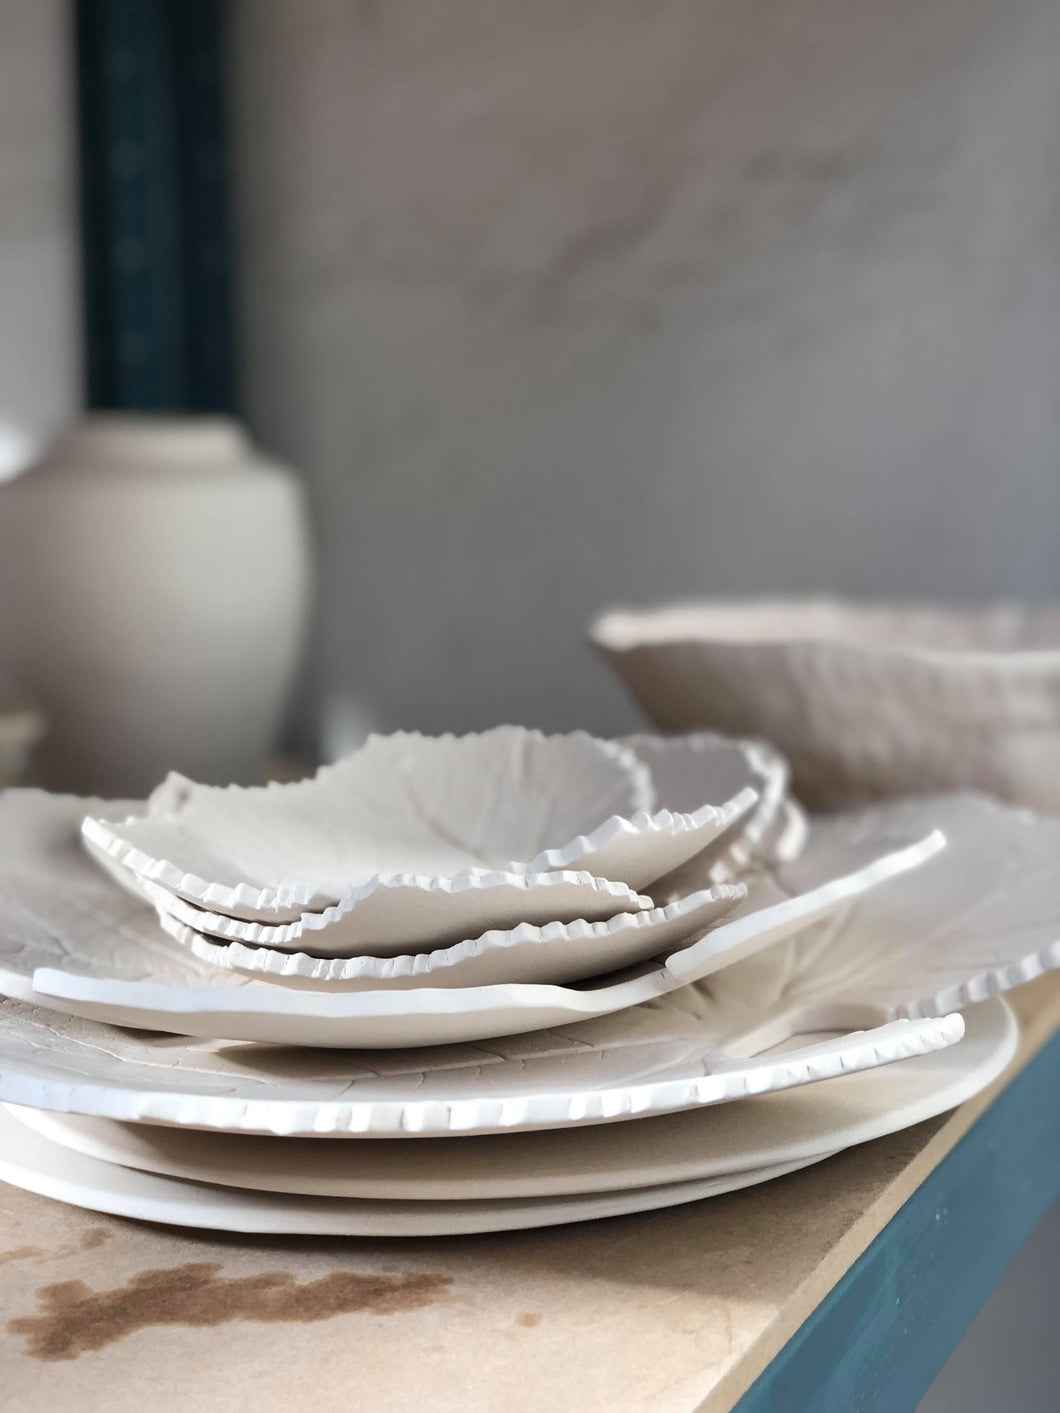 Ceramic Academy : Learn how to make plates and platters in stoneware and porcelain